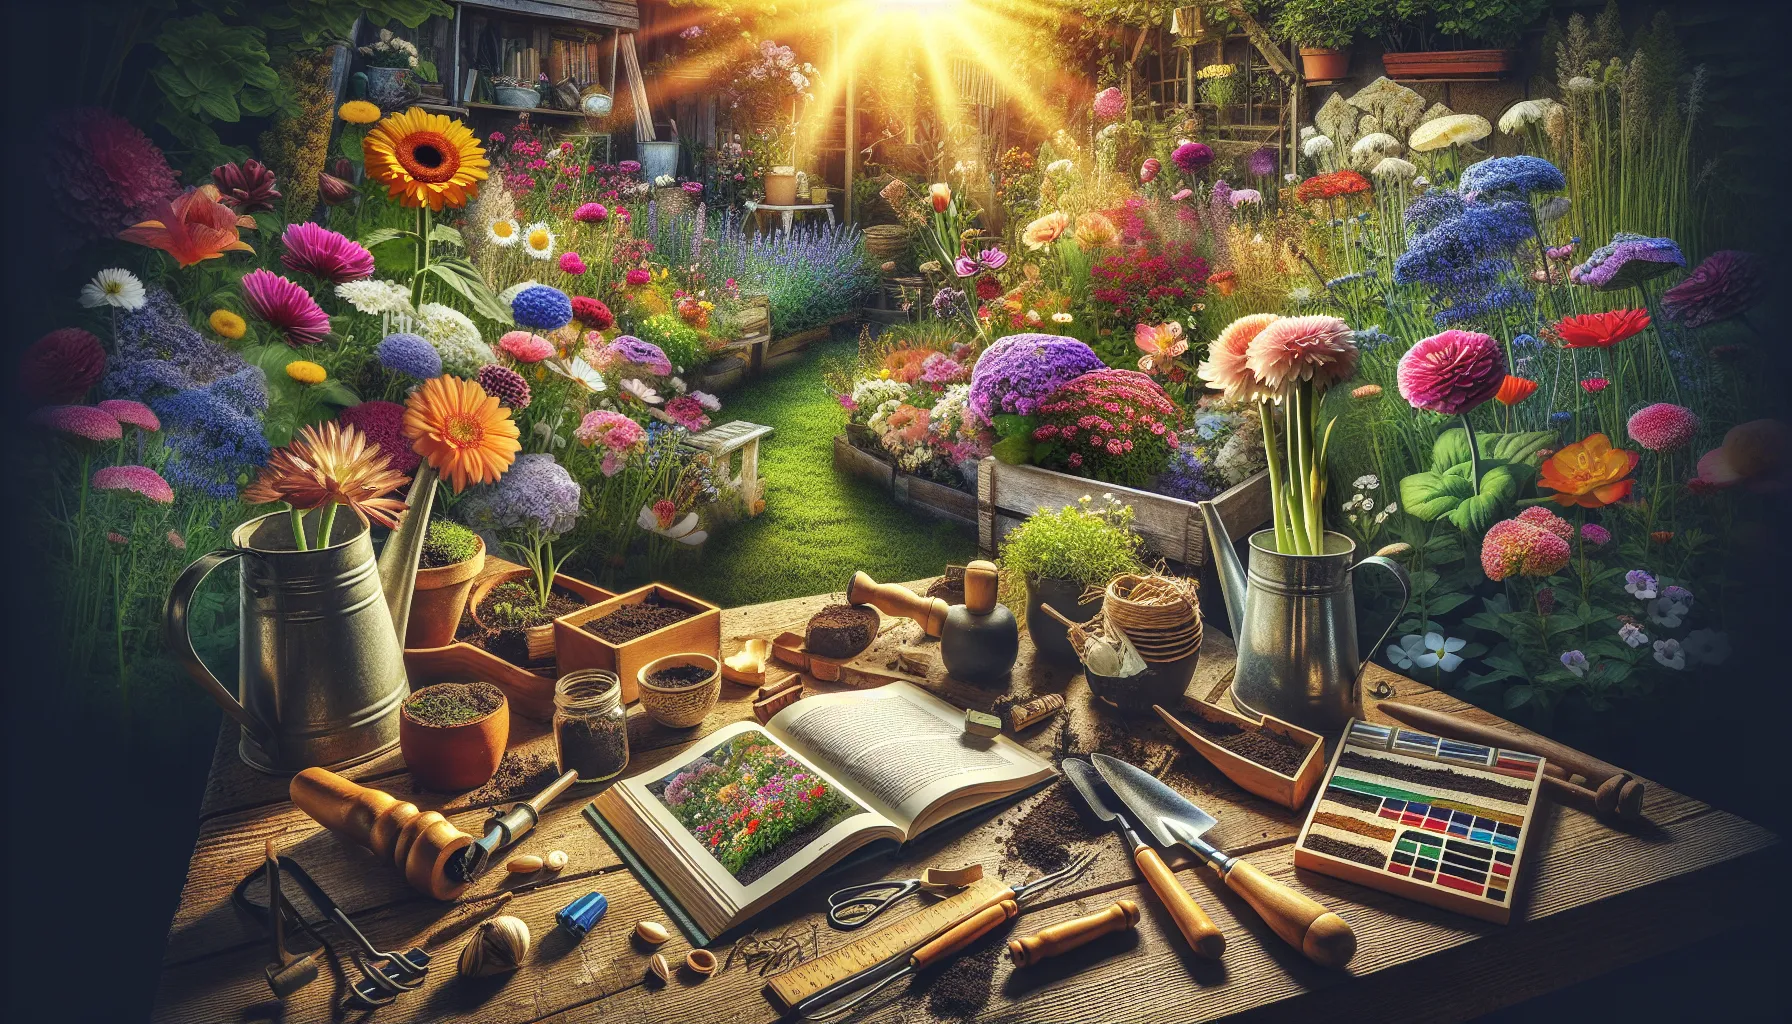 A magical garden scene bathed in sunlight with an array of colorful plant flowers and gardening tools spread on a wooden table.